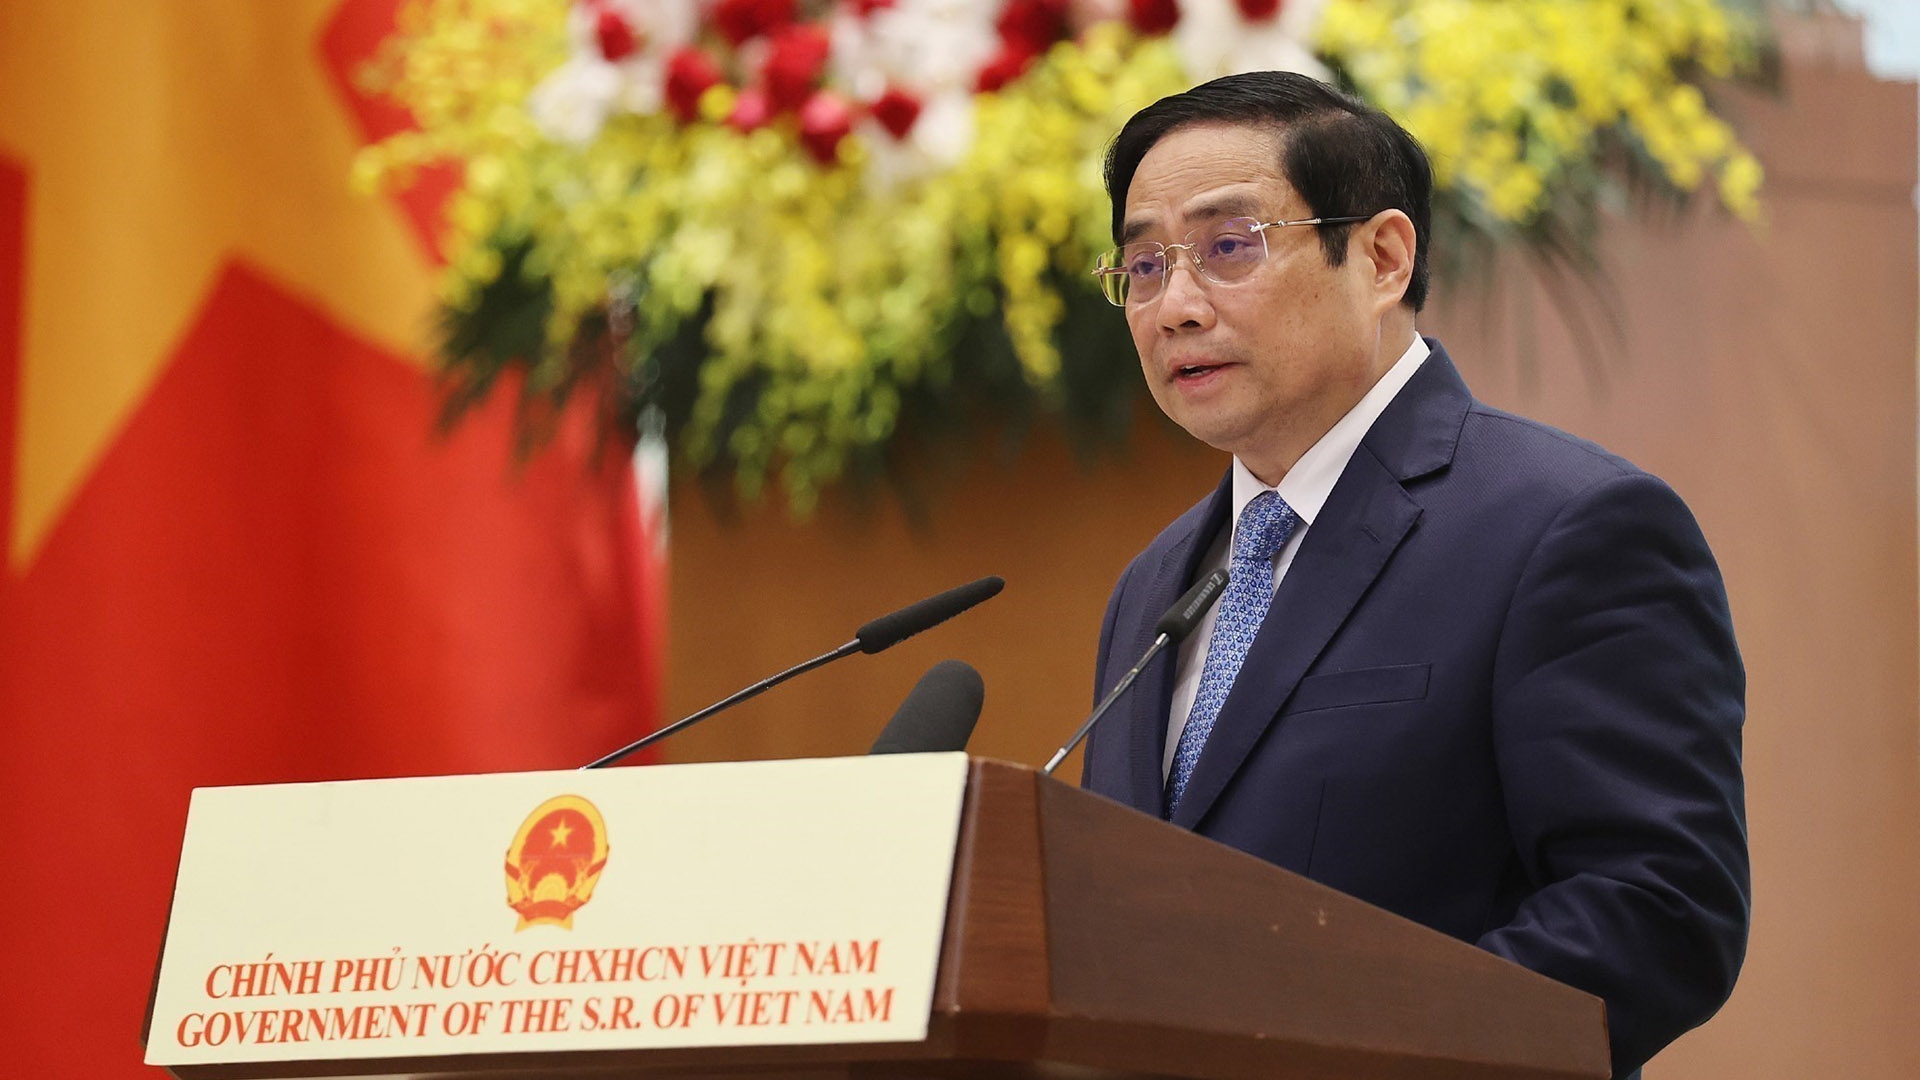 Prime Minister Pham Minh Chinh to attend 2021 Global Trade in Services Summit in China